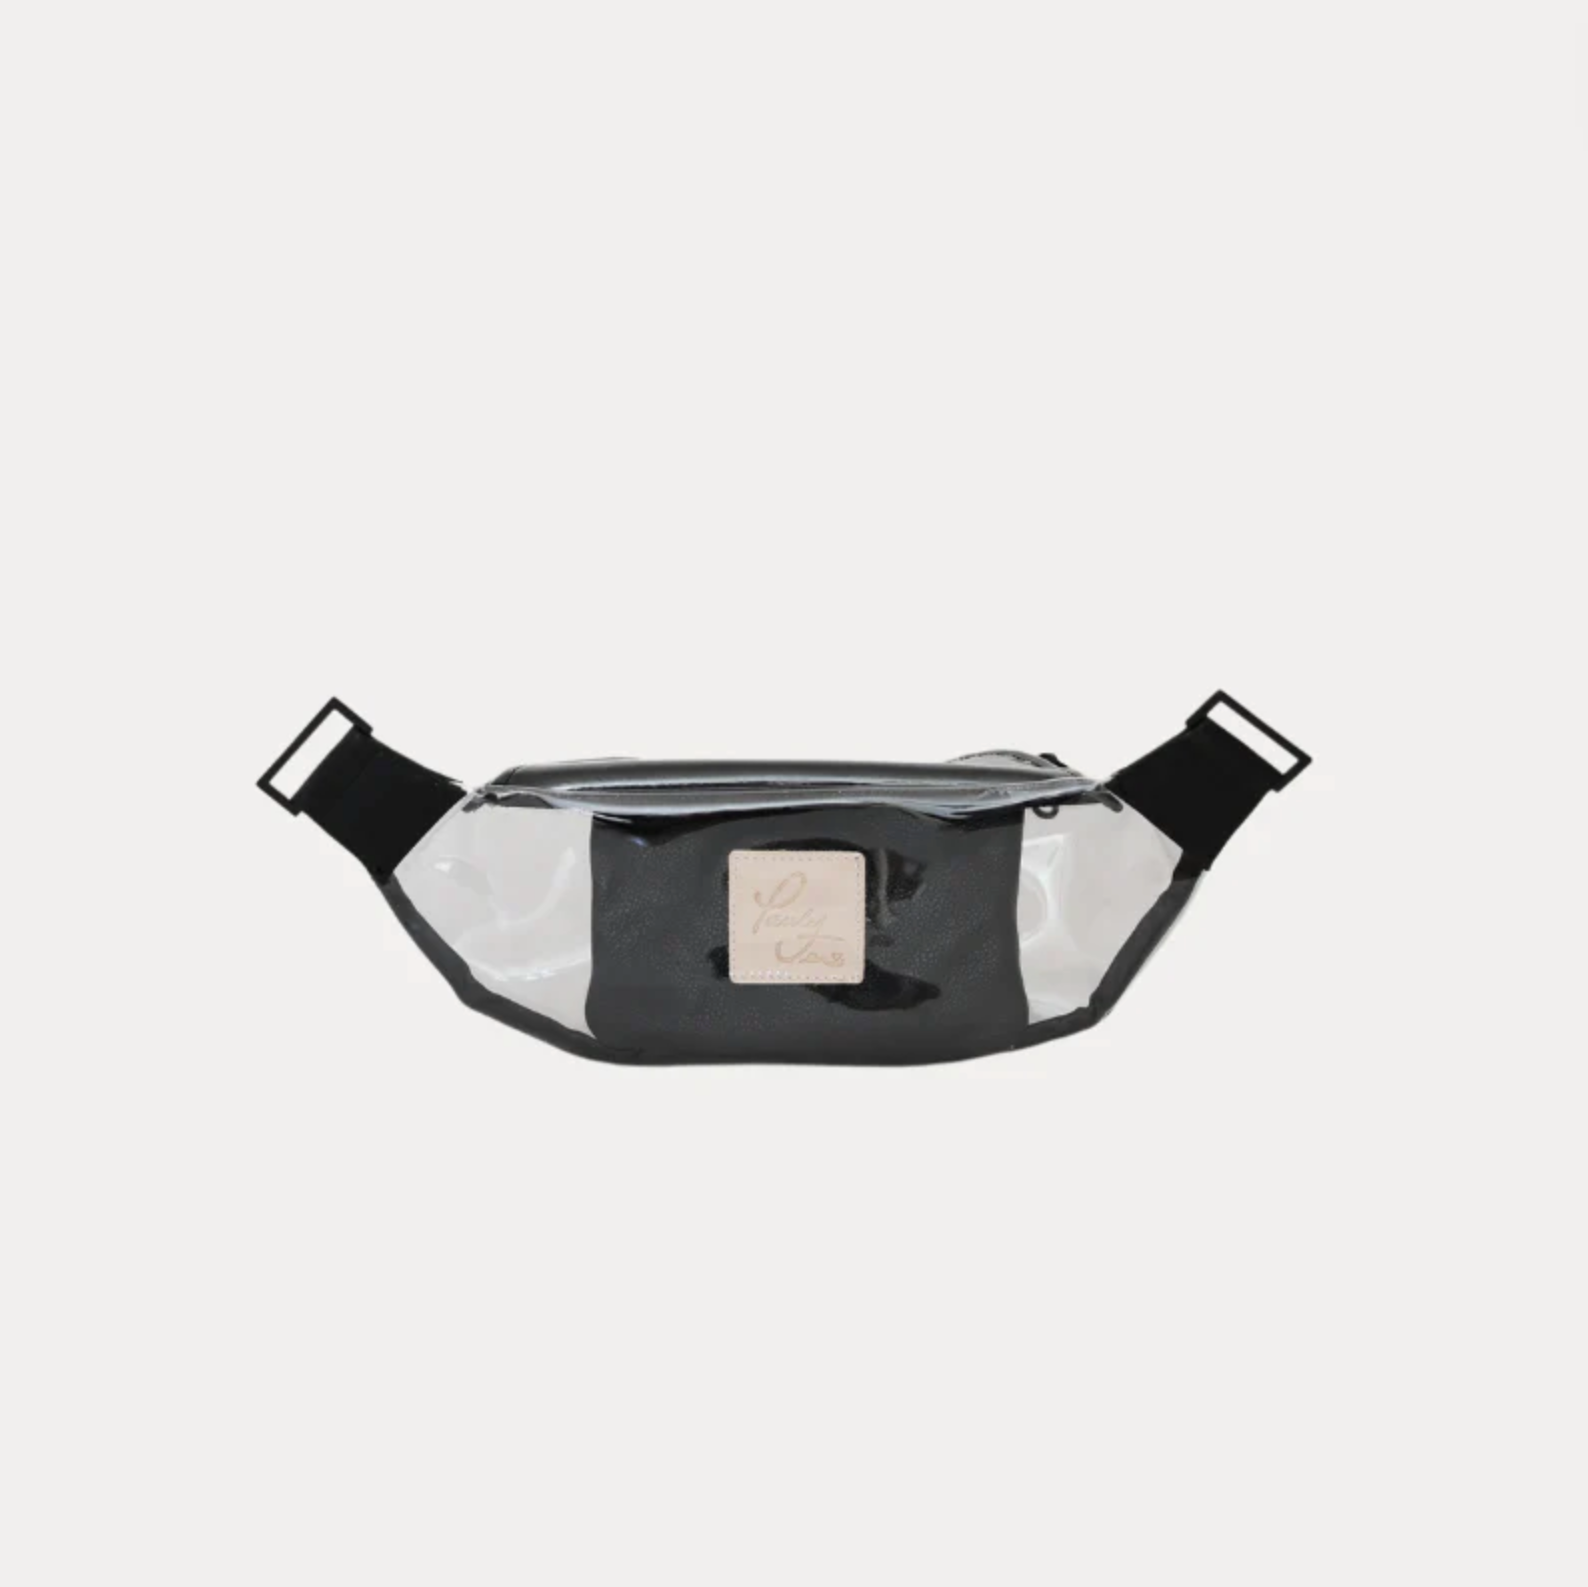 Clear Fanny Pack/Crossbody Bag with Black Leather + Black Hardware + Pauly Pouch Organizer